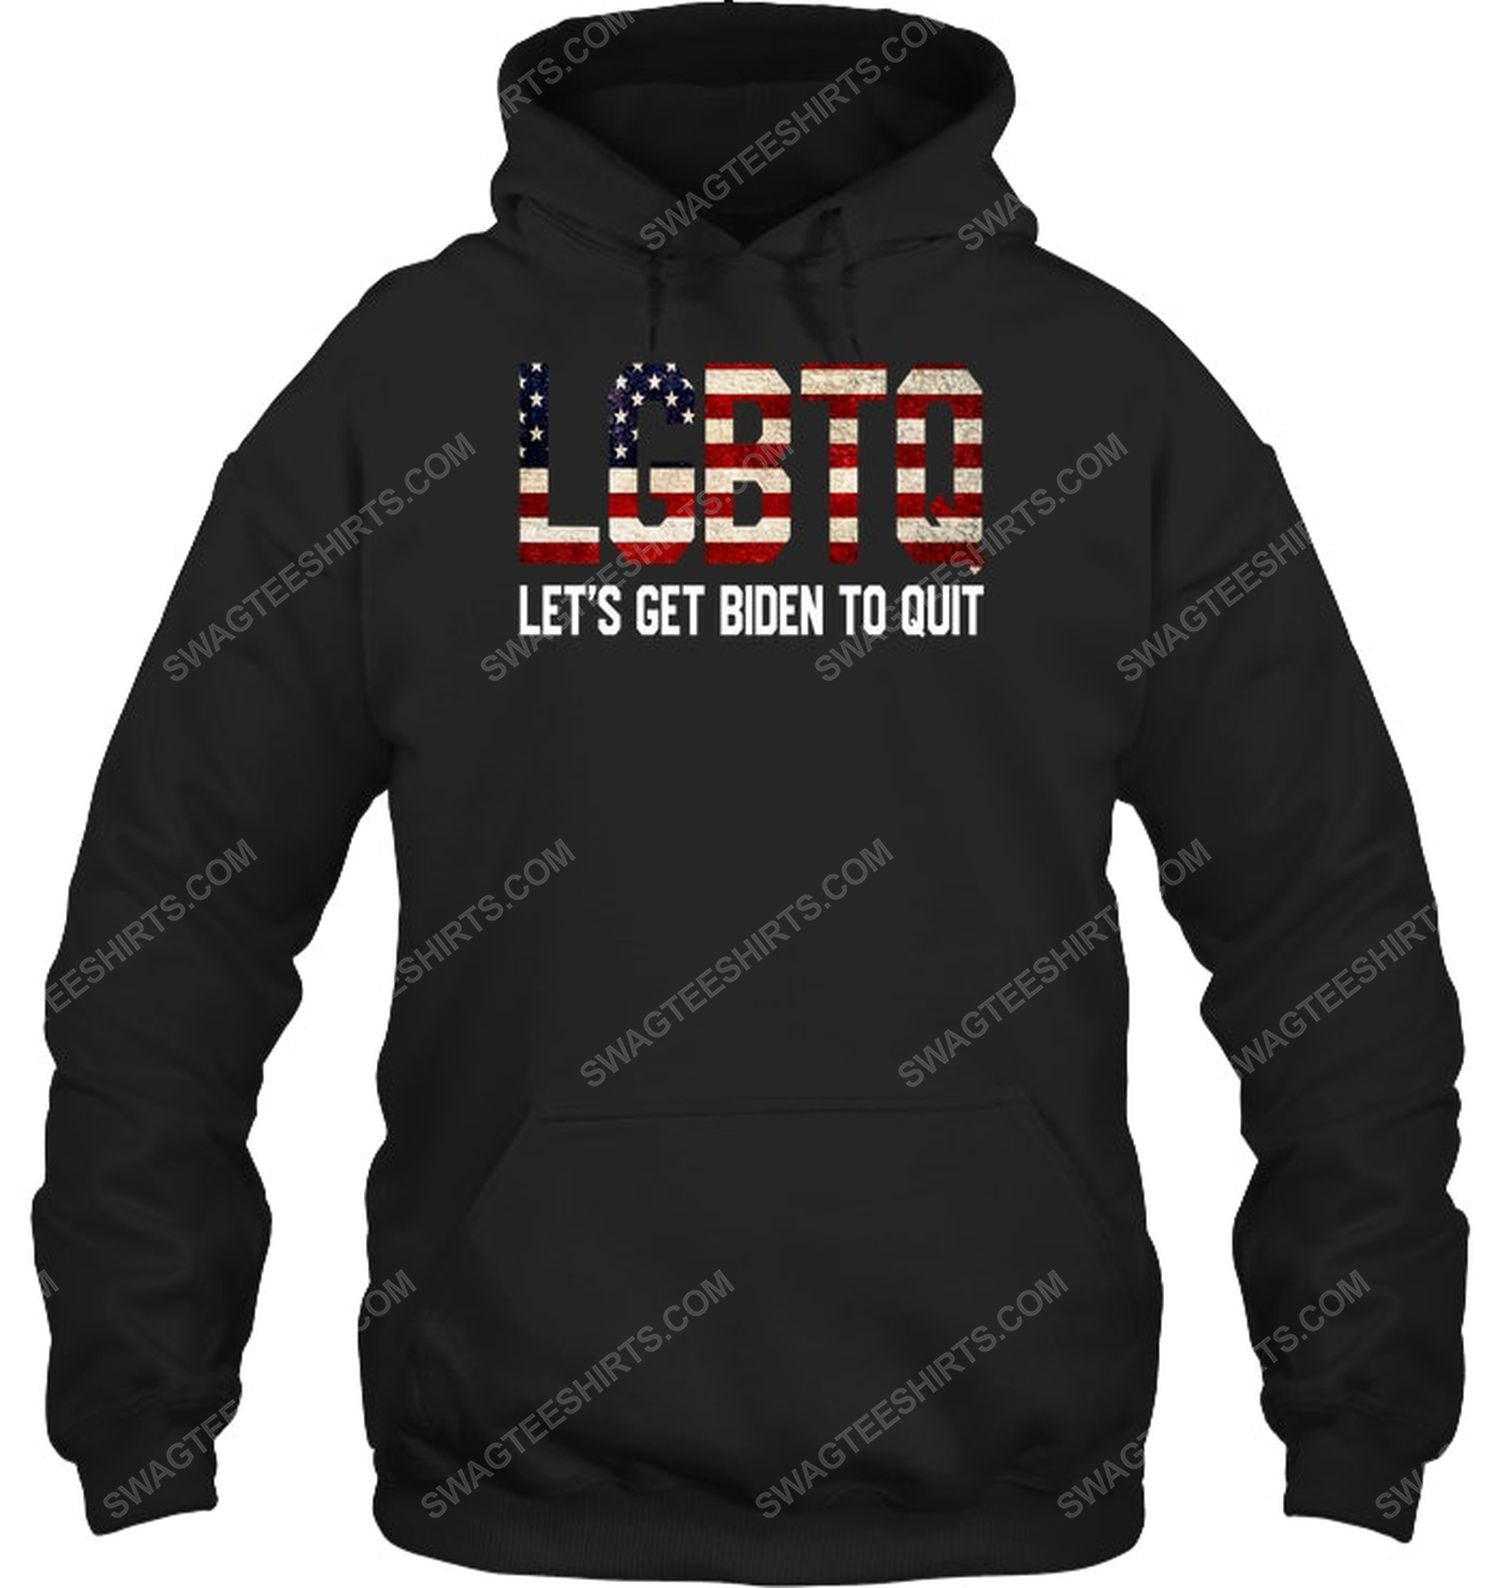 LGBTQ let's get biden to quit american flag political hoodie